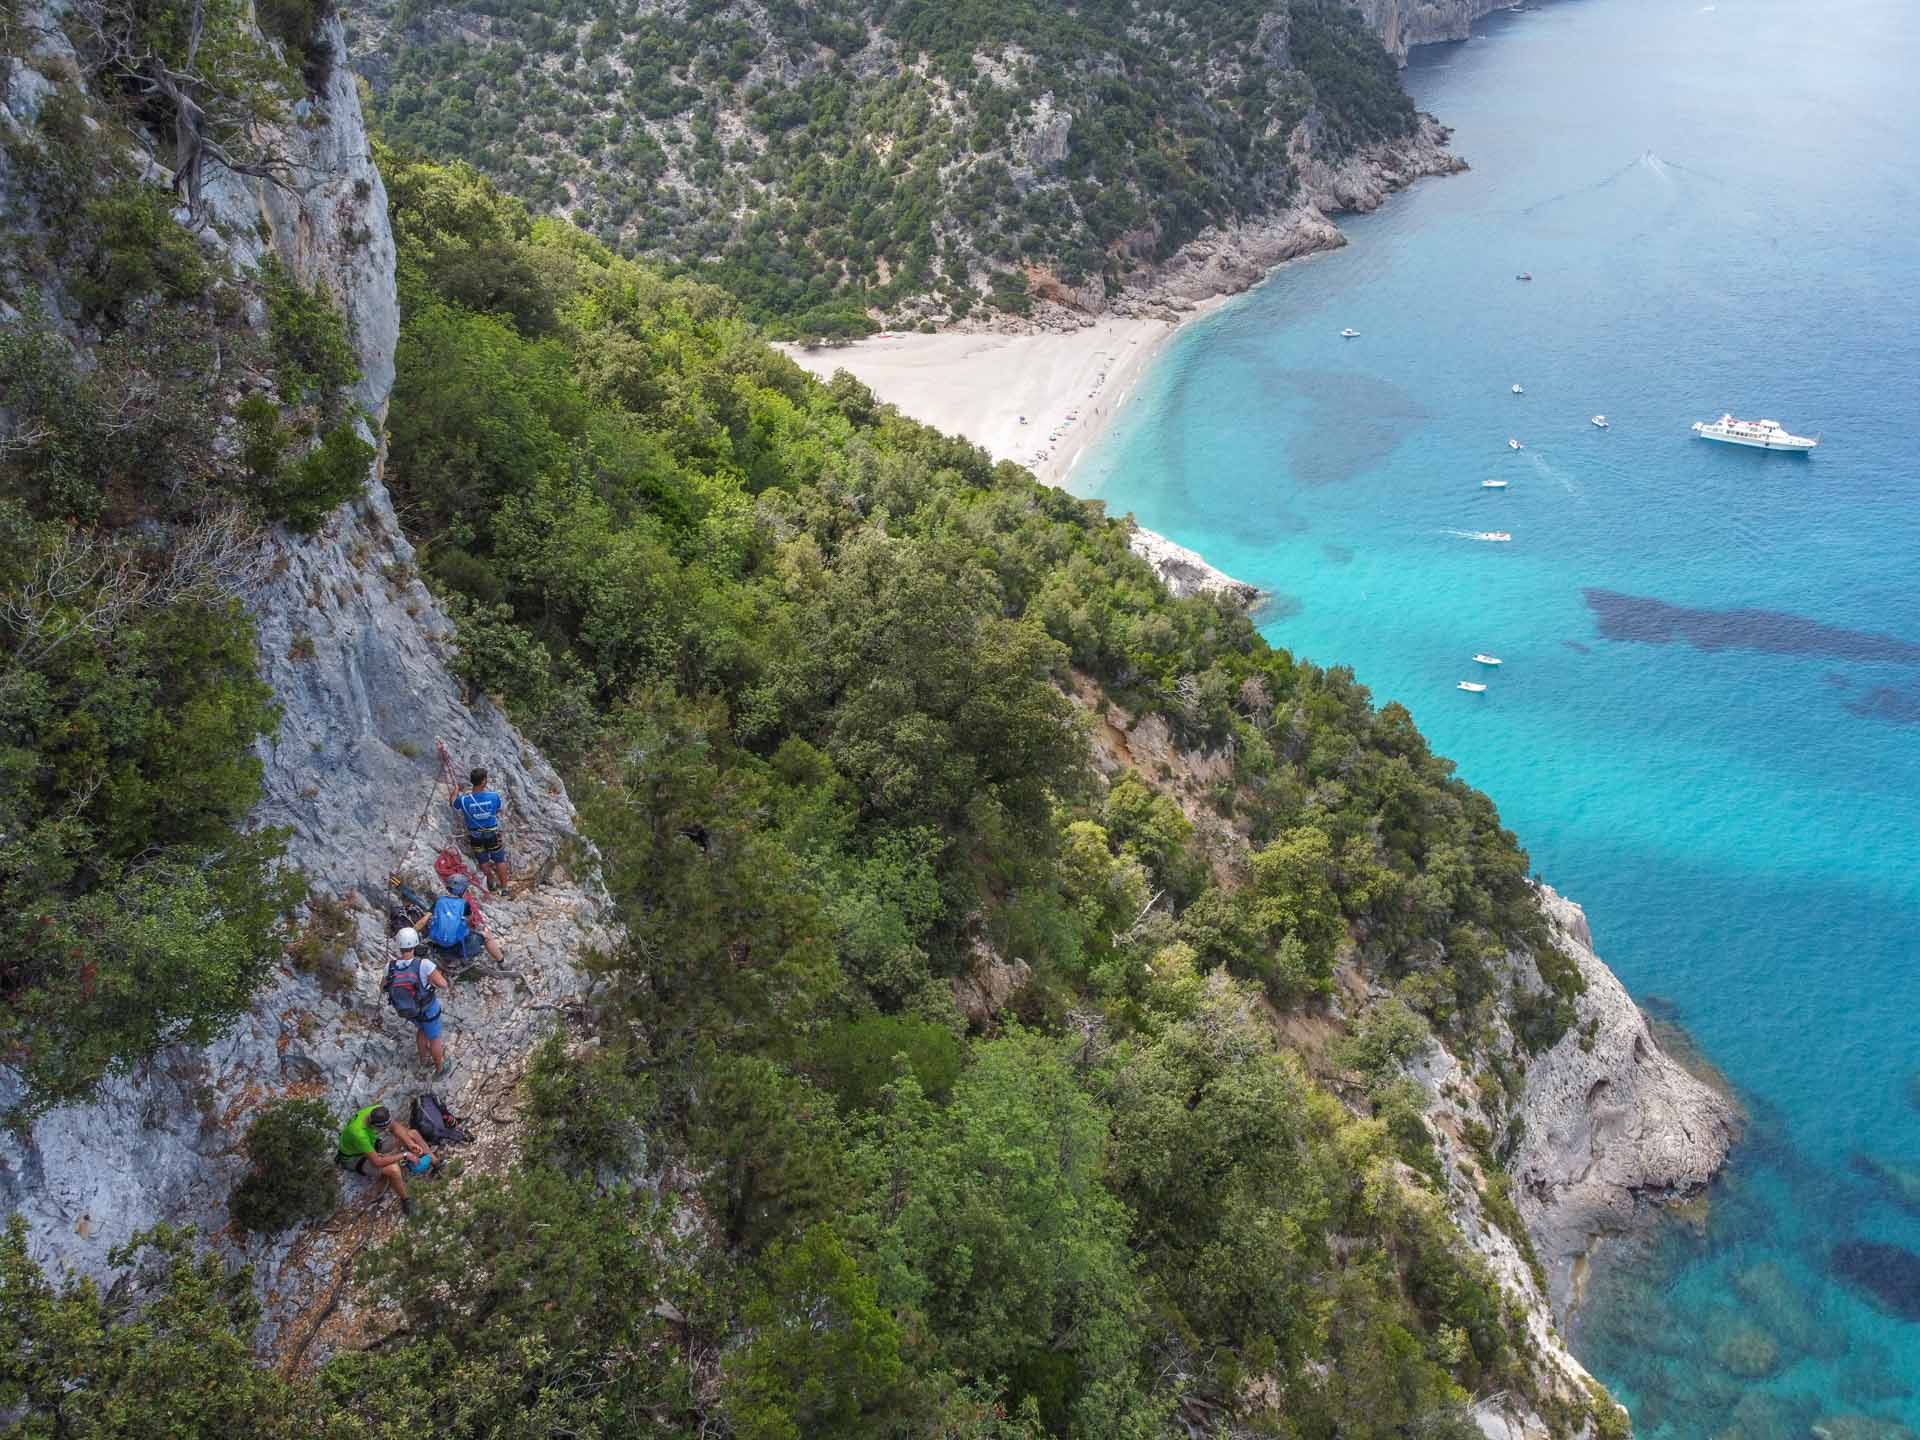 Hikers roped together on the Selvaggio Blue trail, Sardinia, as they negotiate a rocky cliff.